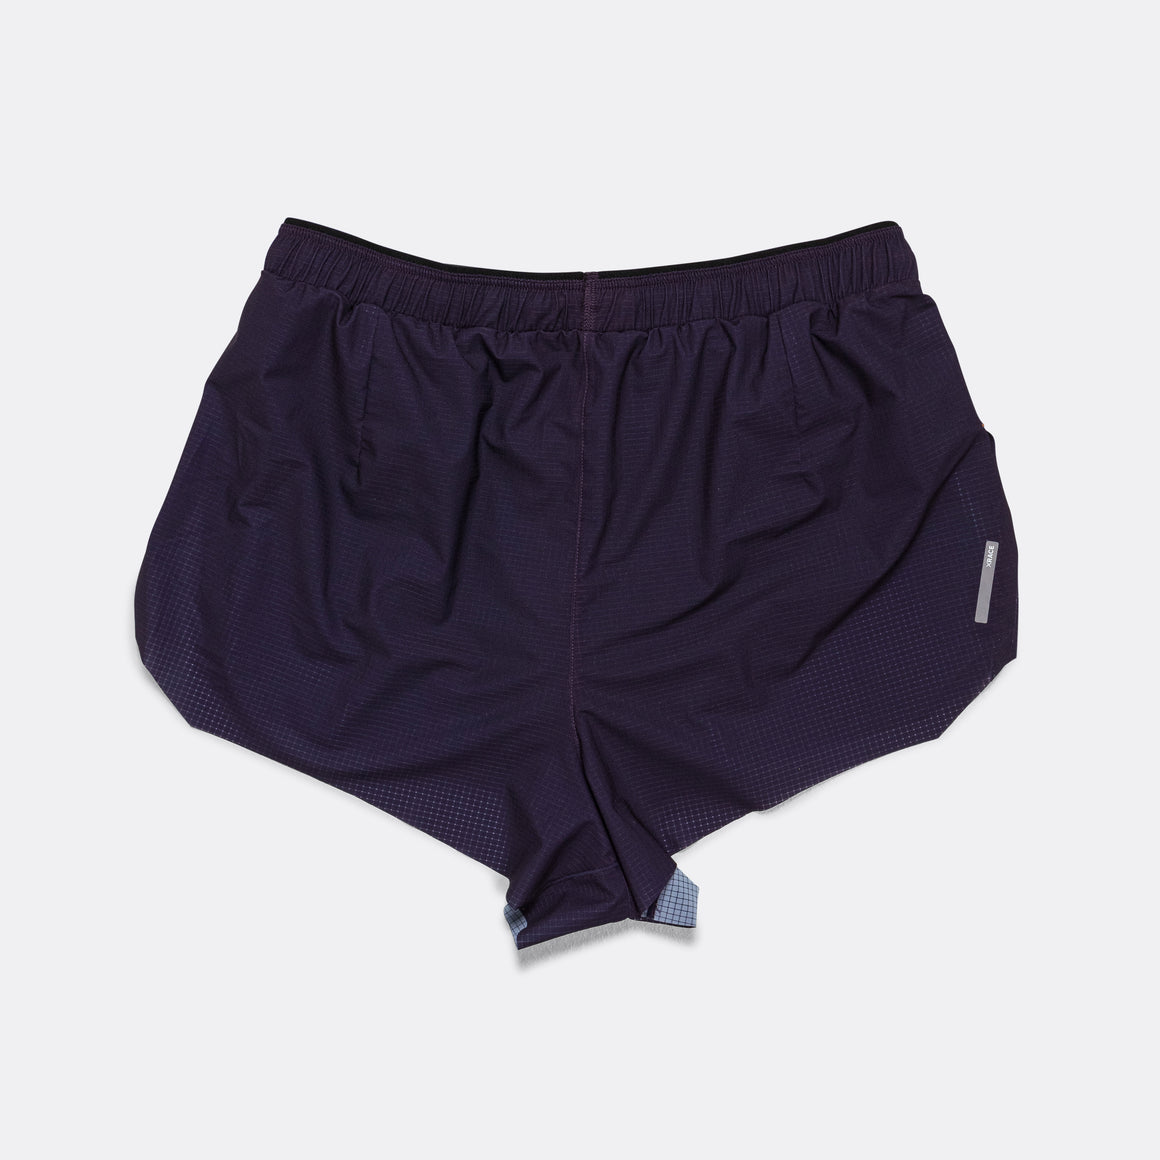 Soar - Mens Race Shorts - Purple - Up There Athletics